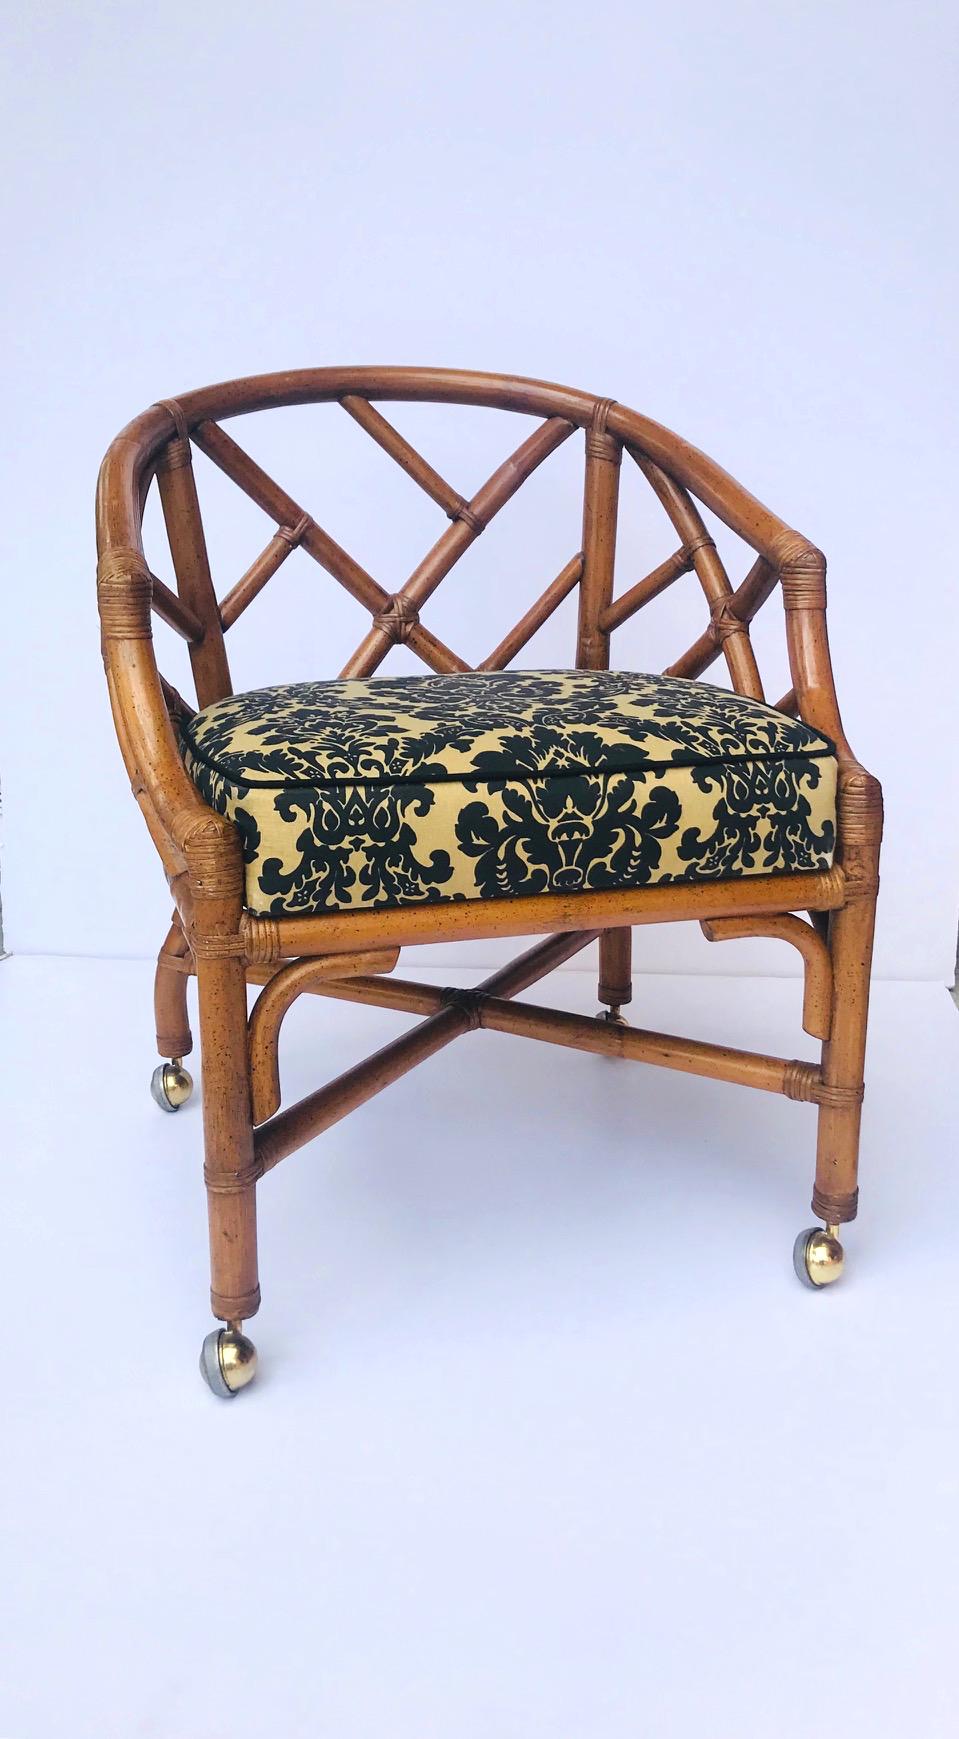 Fabulous Hollywood Regency Chinese Chippendale desk chair. Striking from all angles and easily swivels. Fitted with four brass castors. Upholstered in damask print textile in hues of black over tan, and waterproof.